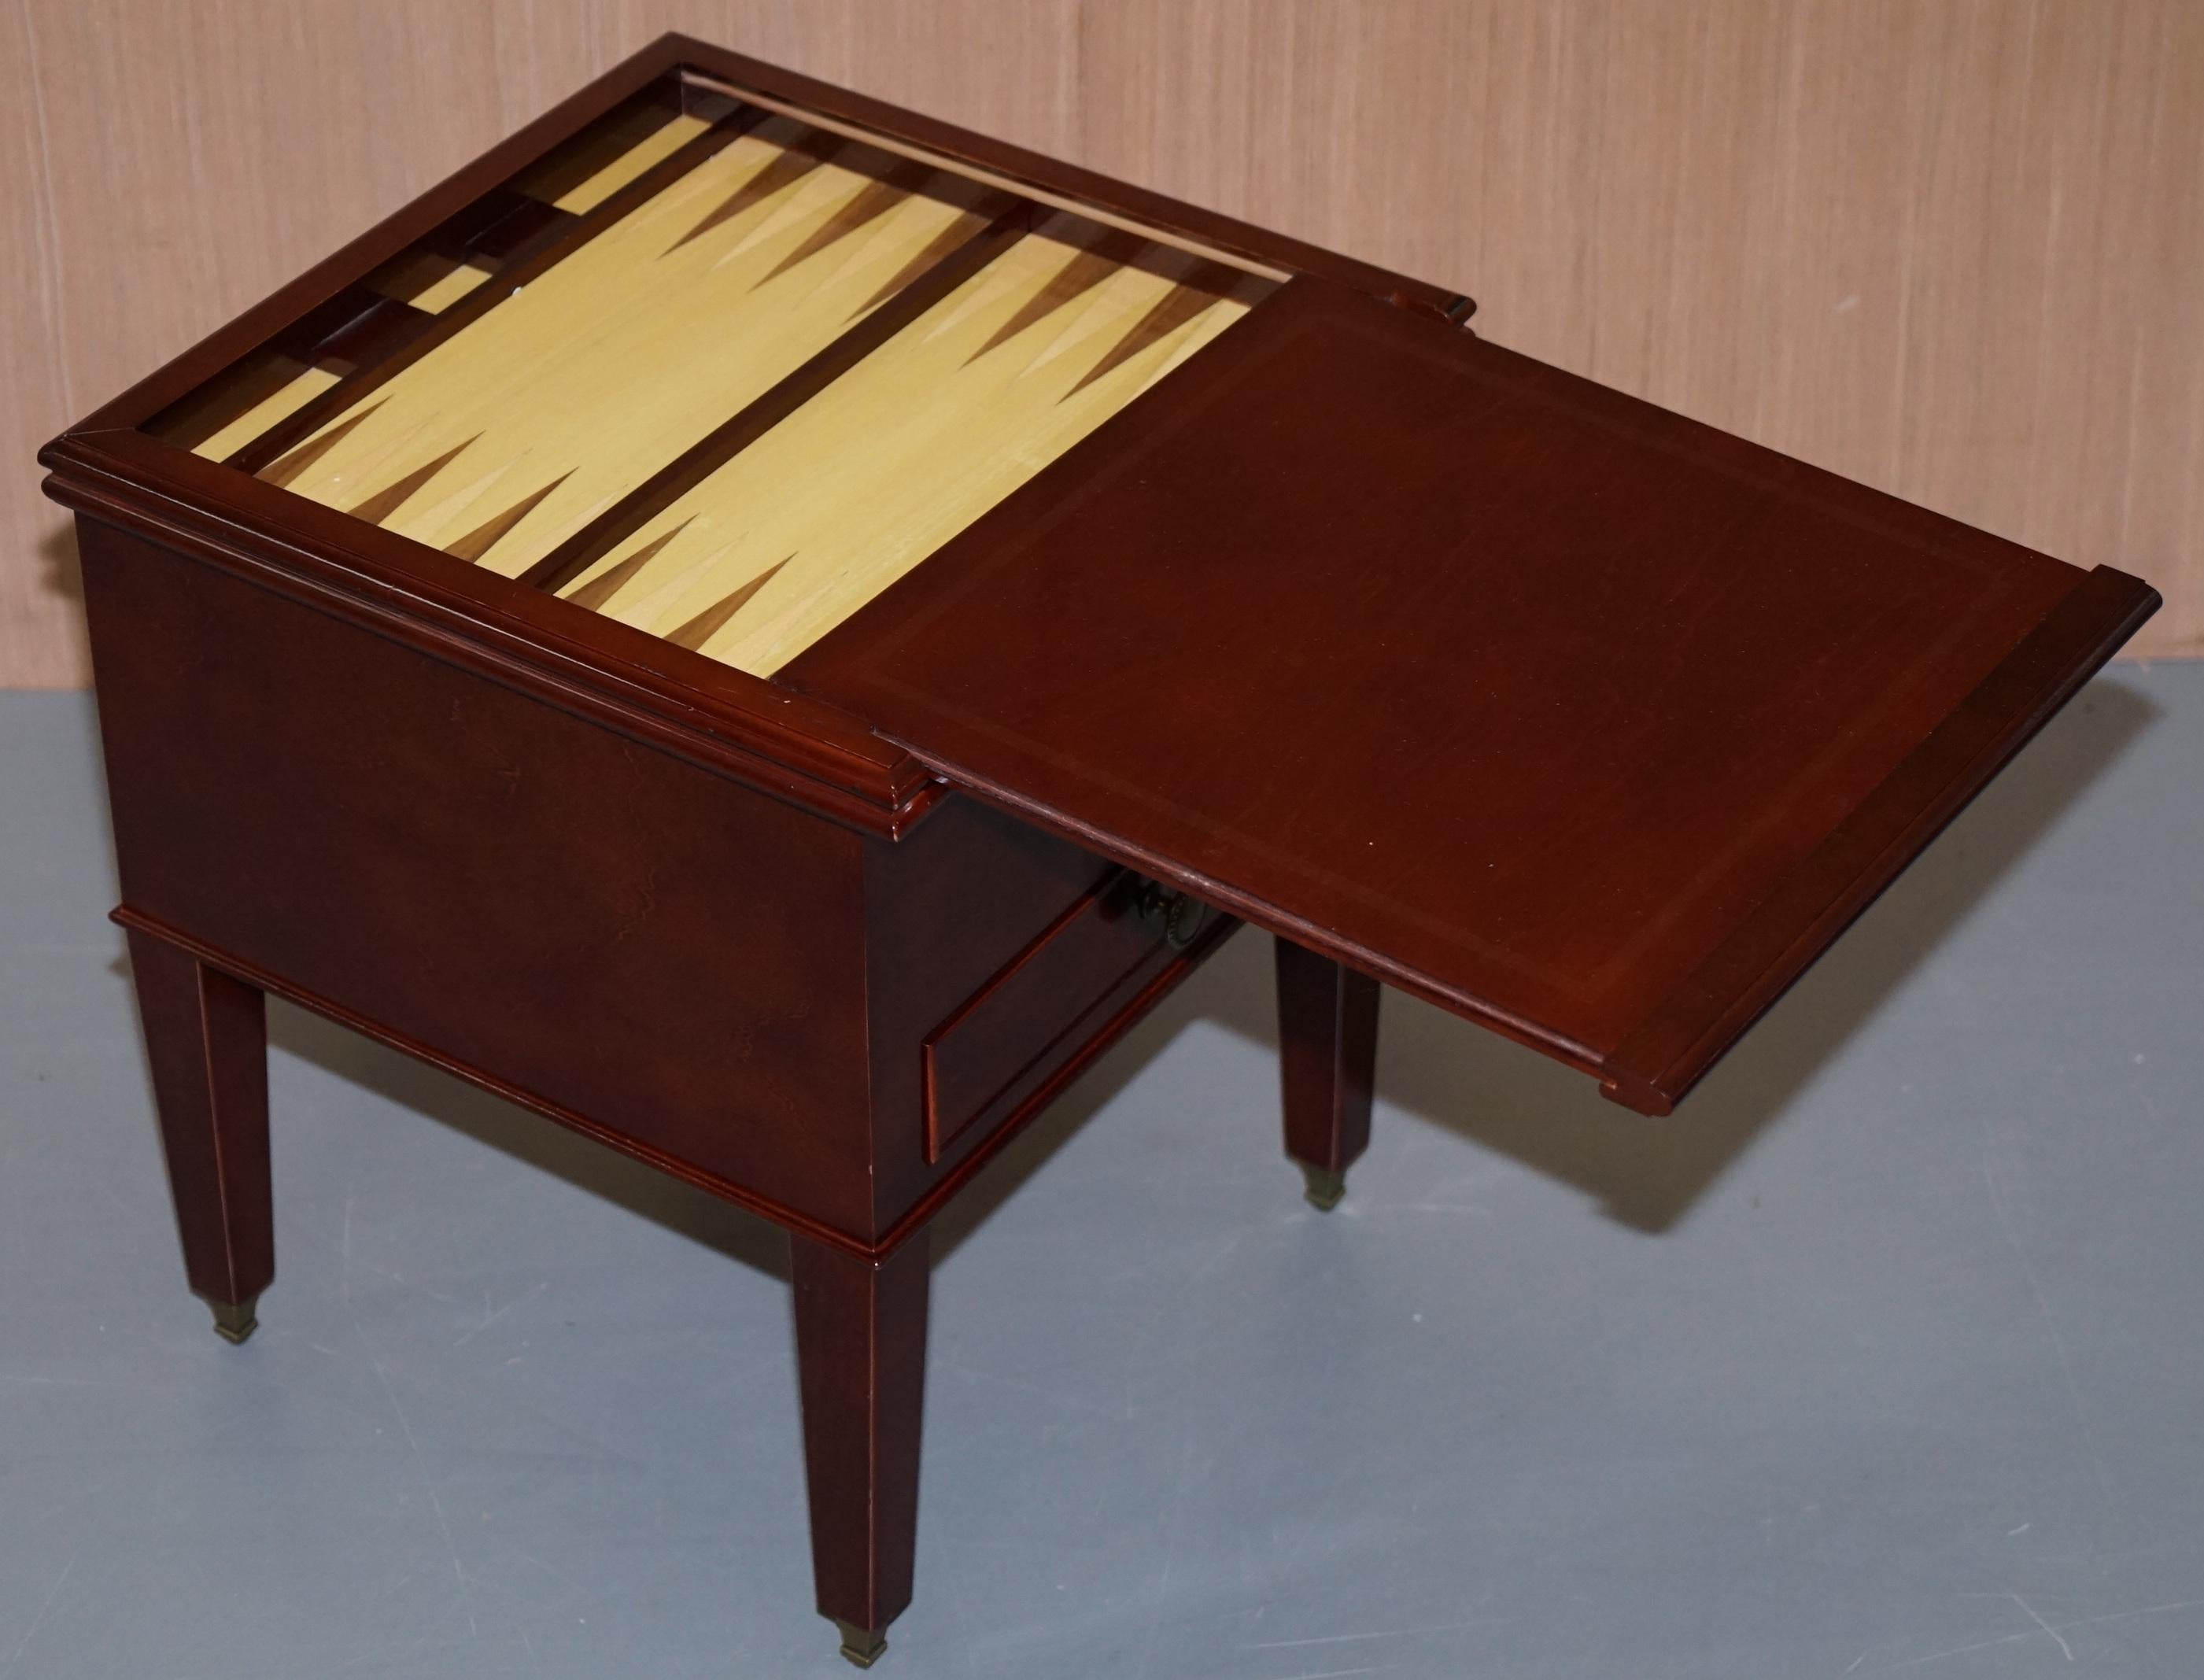 Lovely Small Games Table Metamorphic Chess Backgammon Board Sliding Top 2